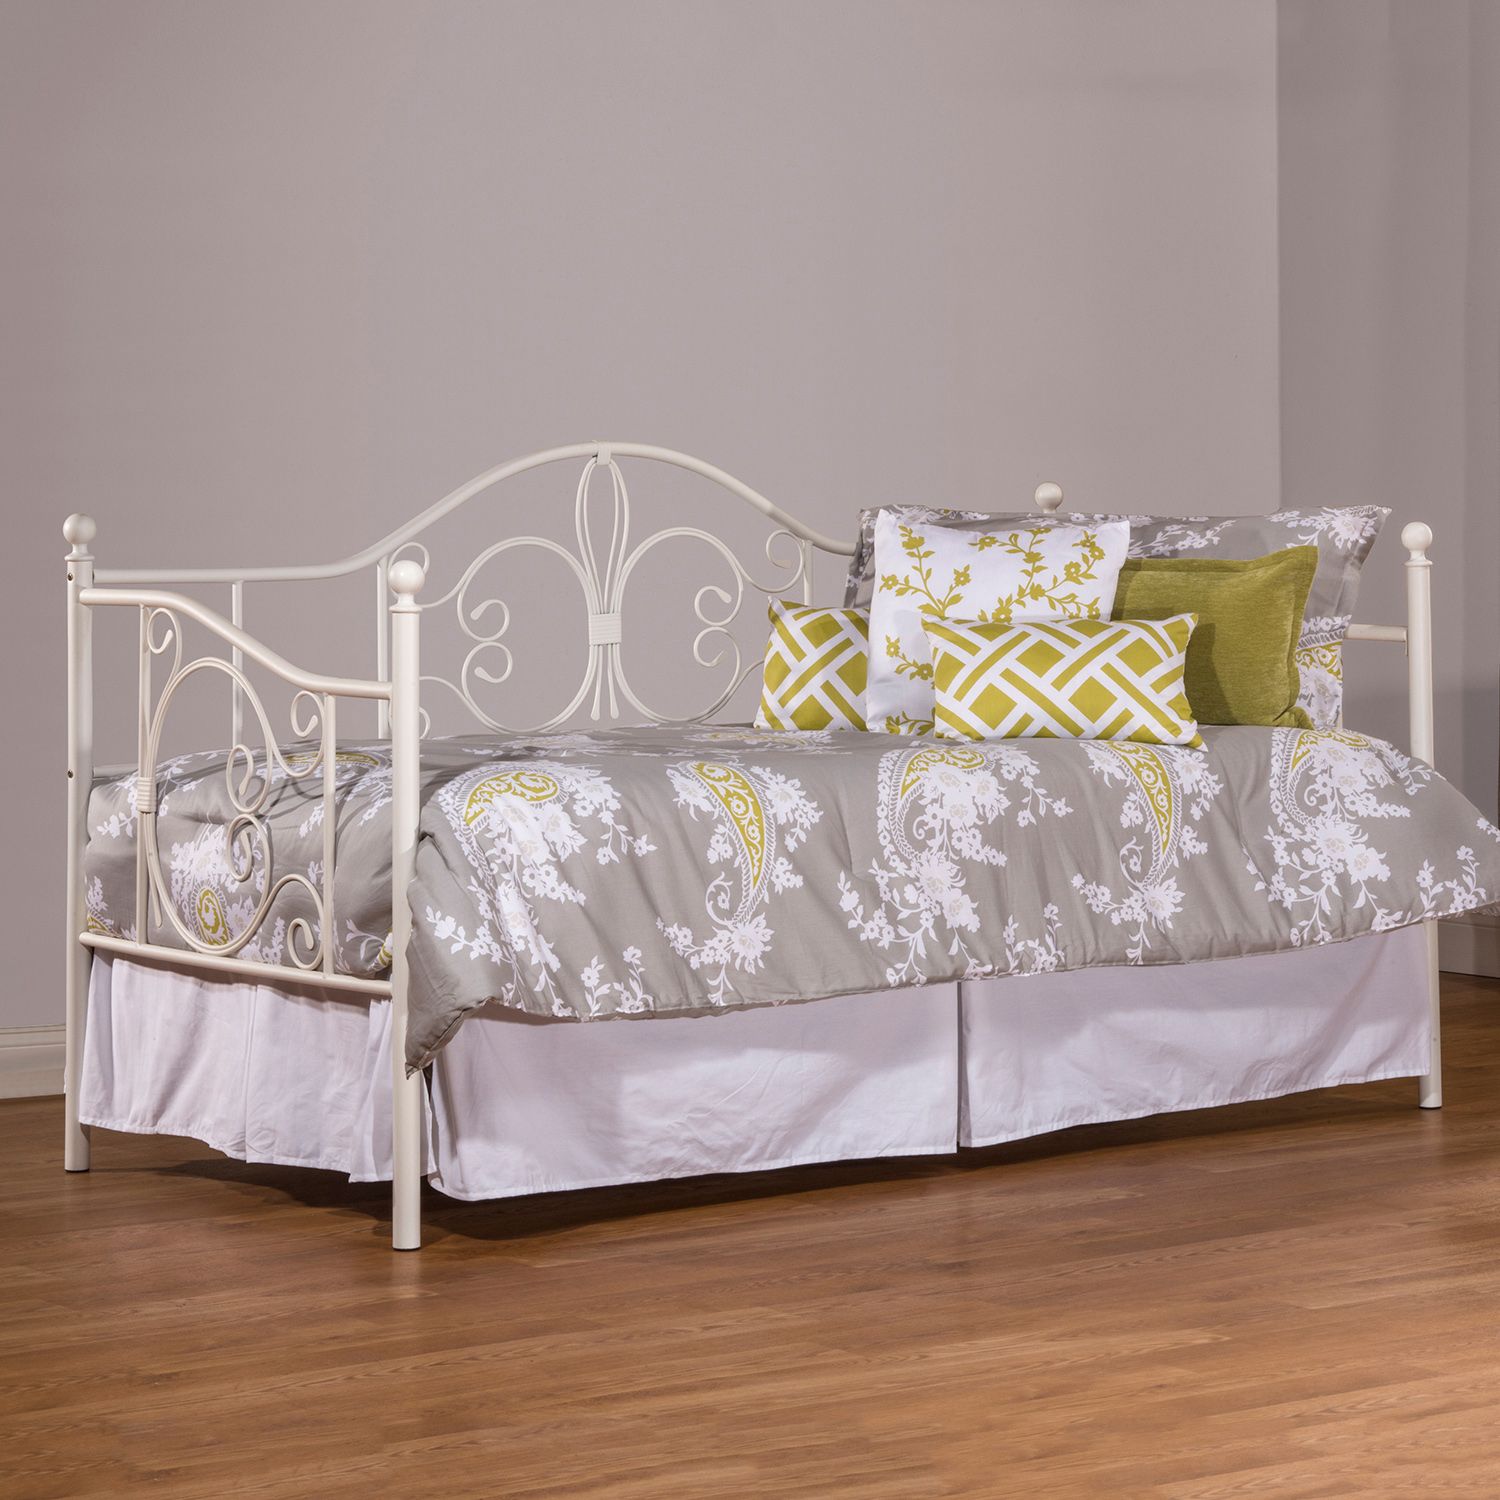 Image for Hillsdale Furniture Ruby Daybed & Trundle at Kohl's.